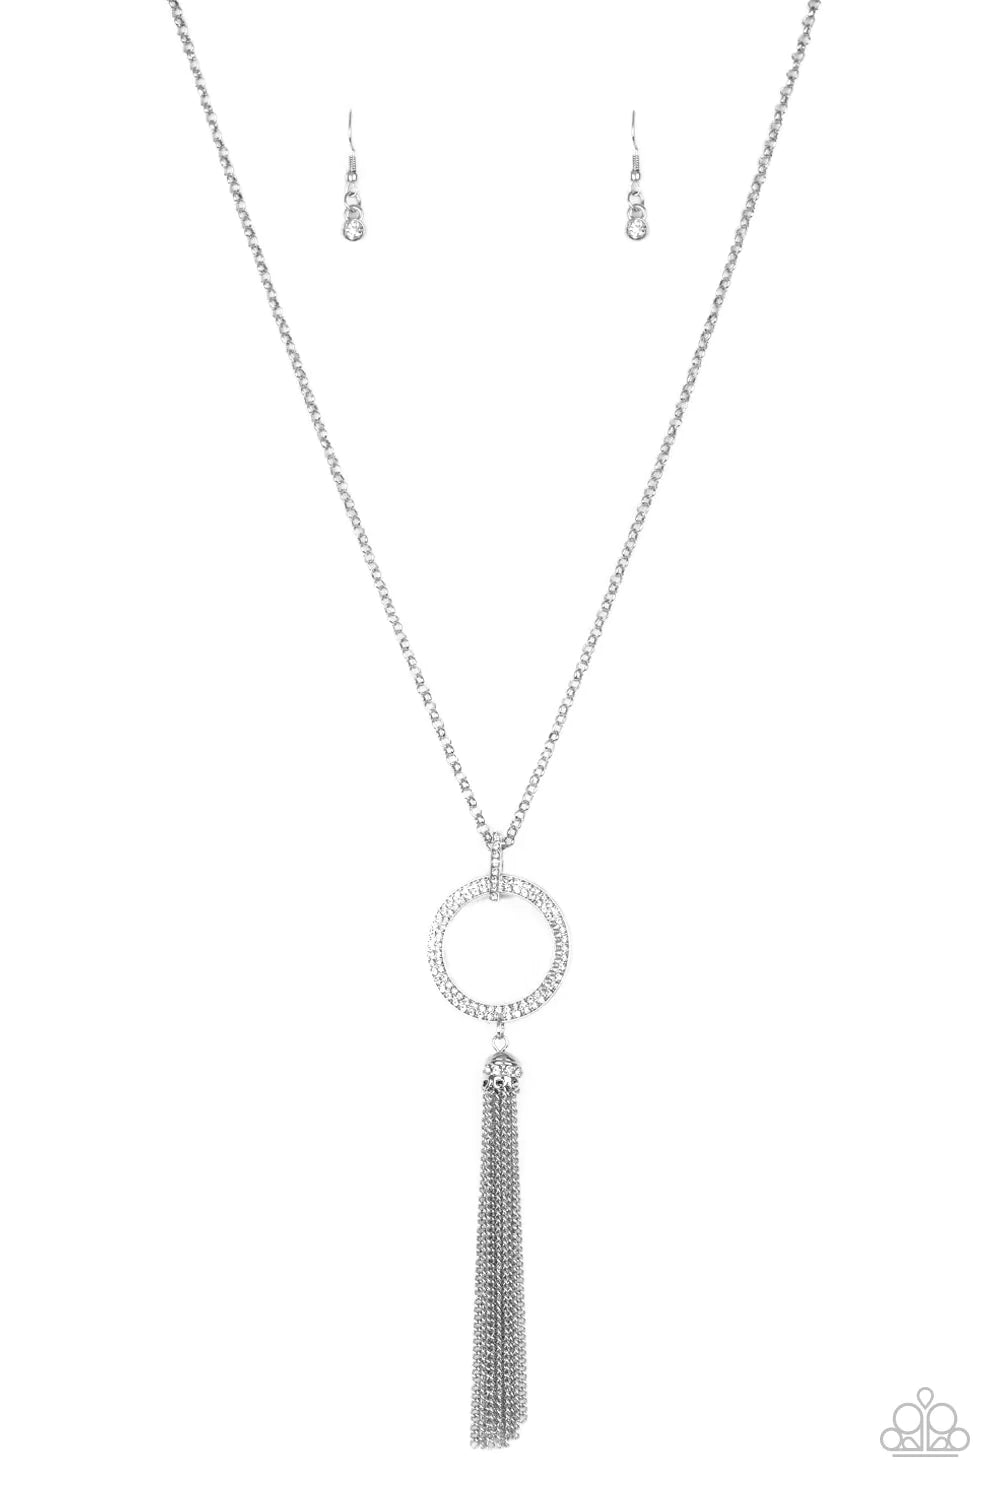 Paparazzi Necklace - Straight To The Top - White